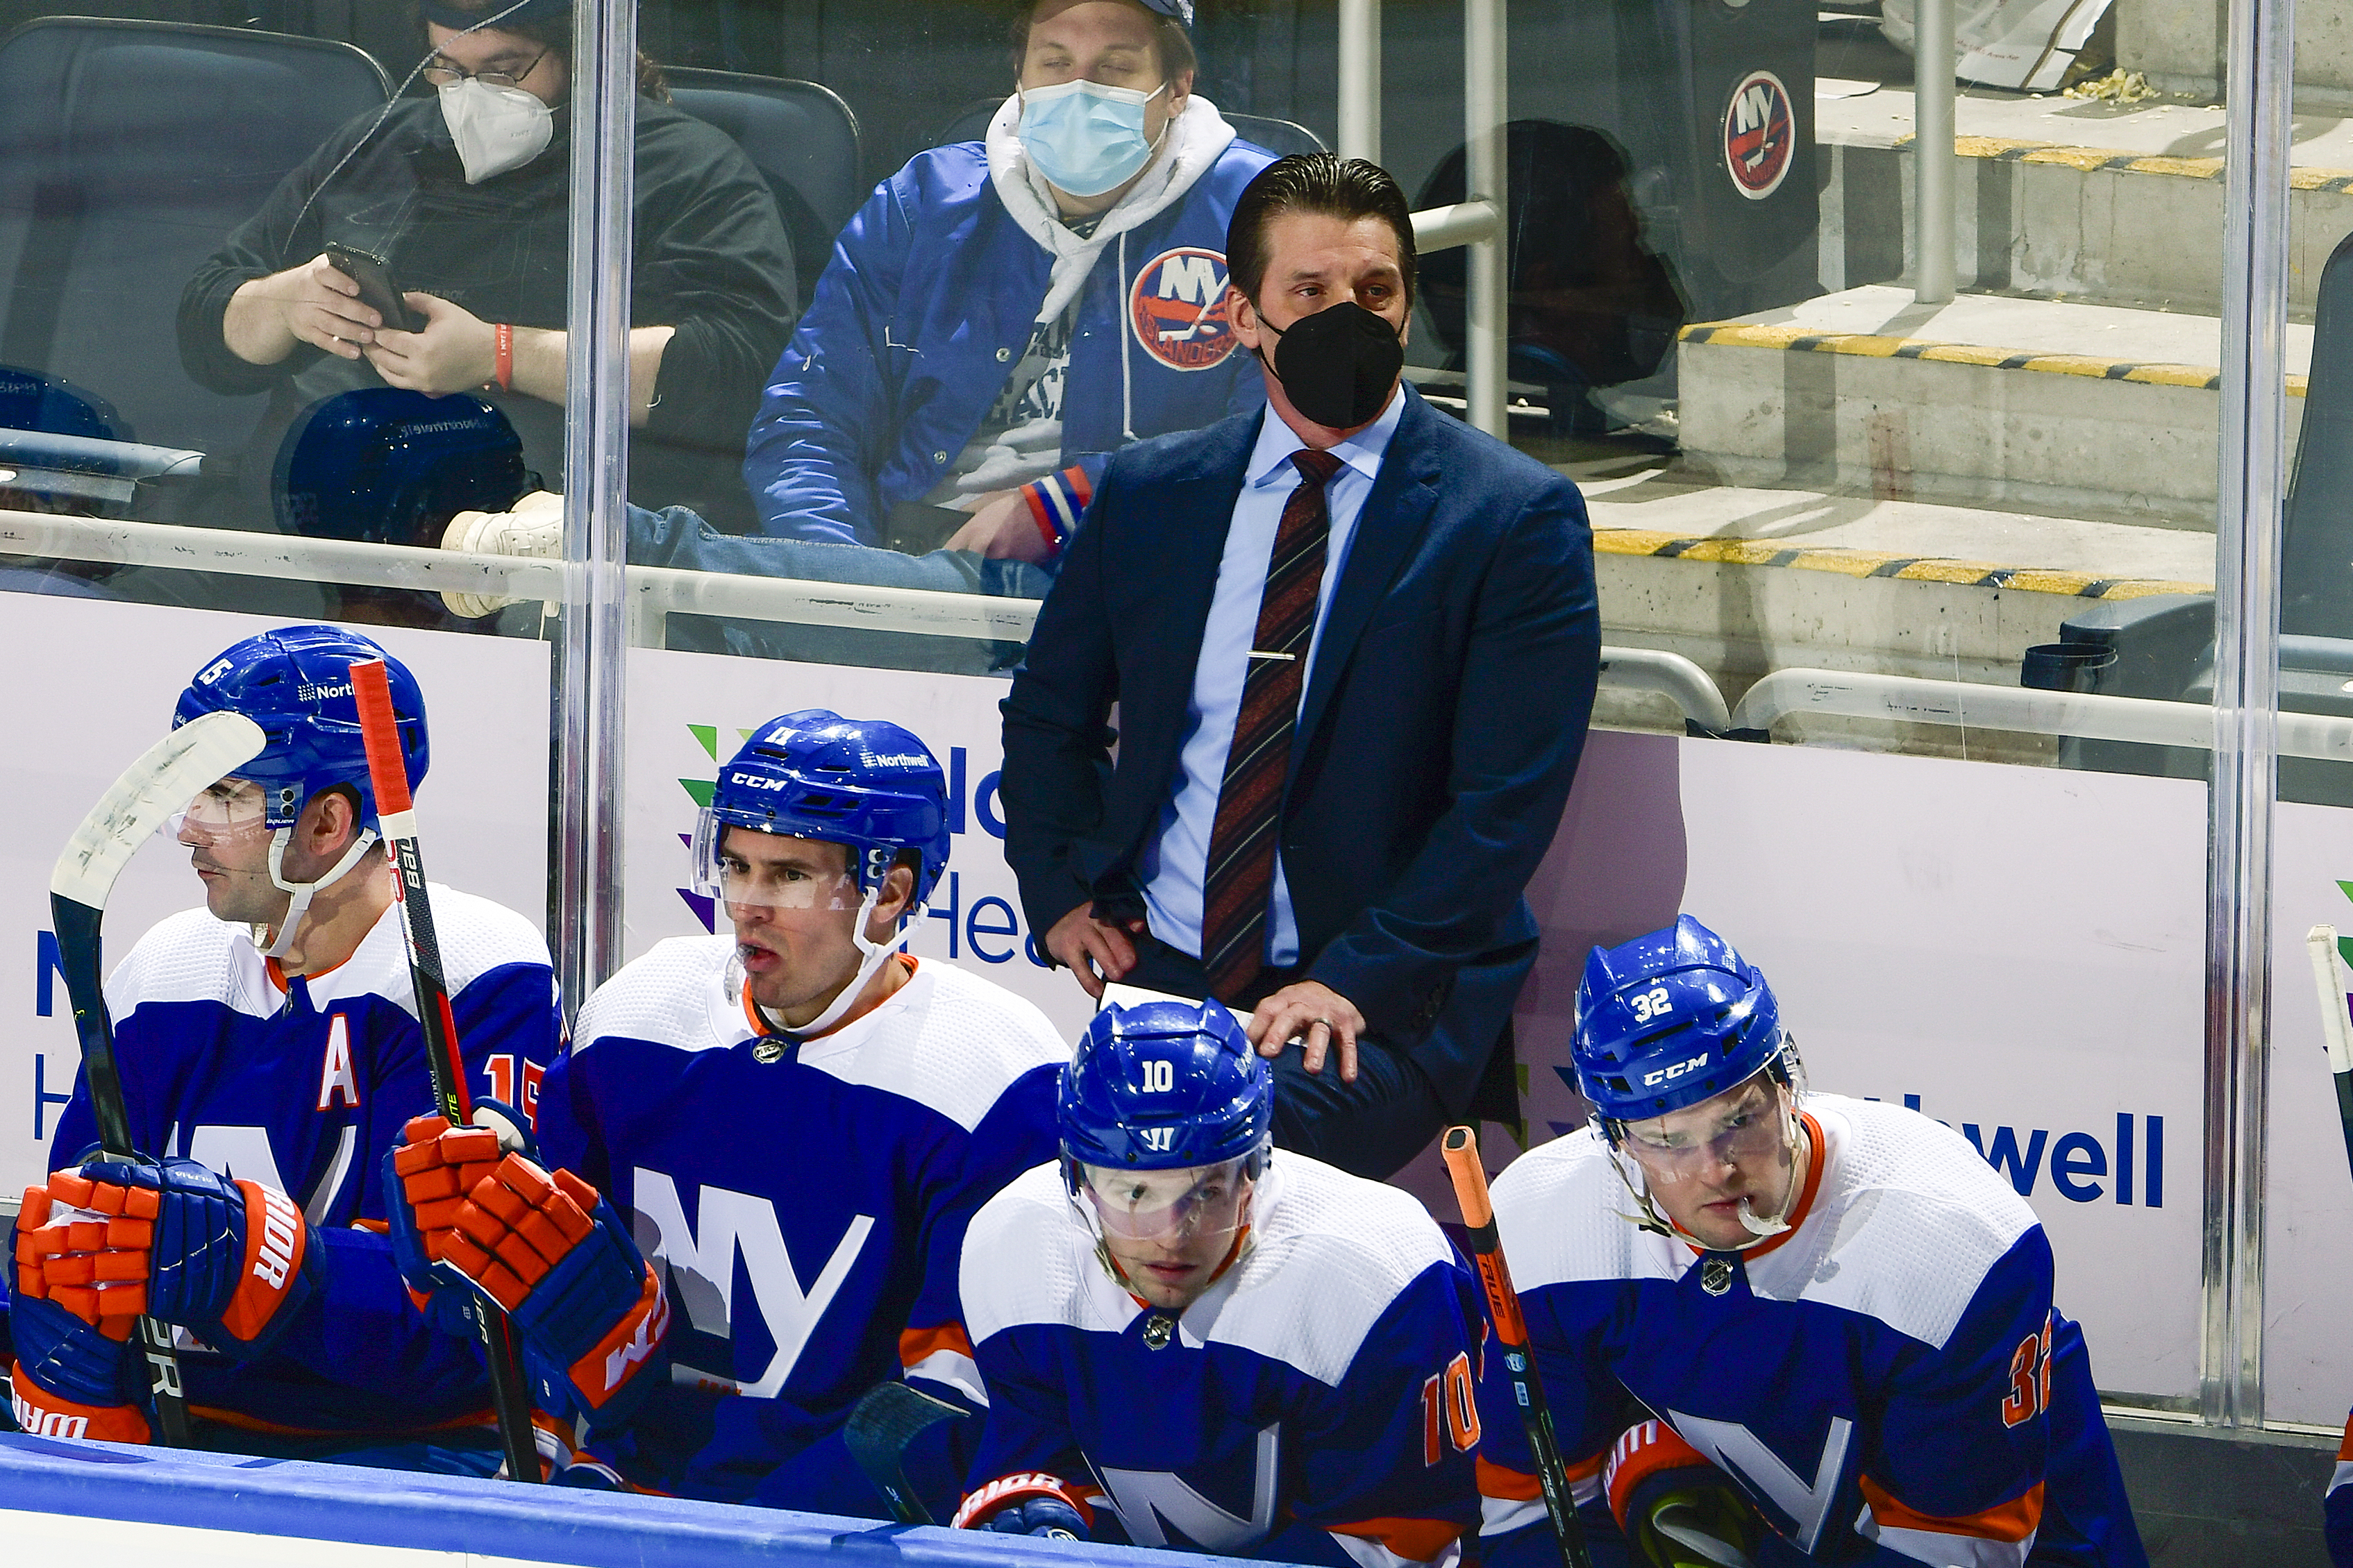 Lane Lambert looks on the Islanders' bench during their 3-2 overtime win over the Oilers.